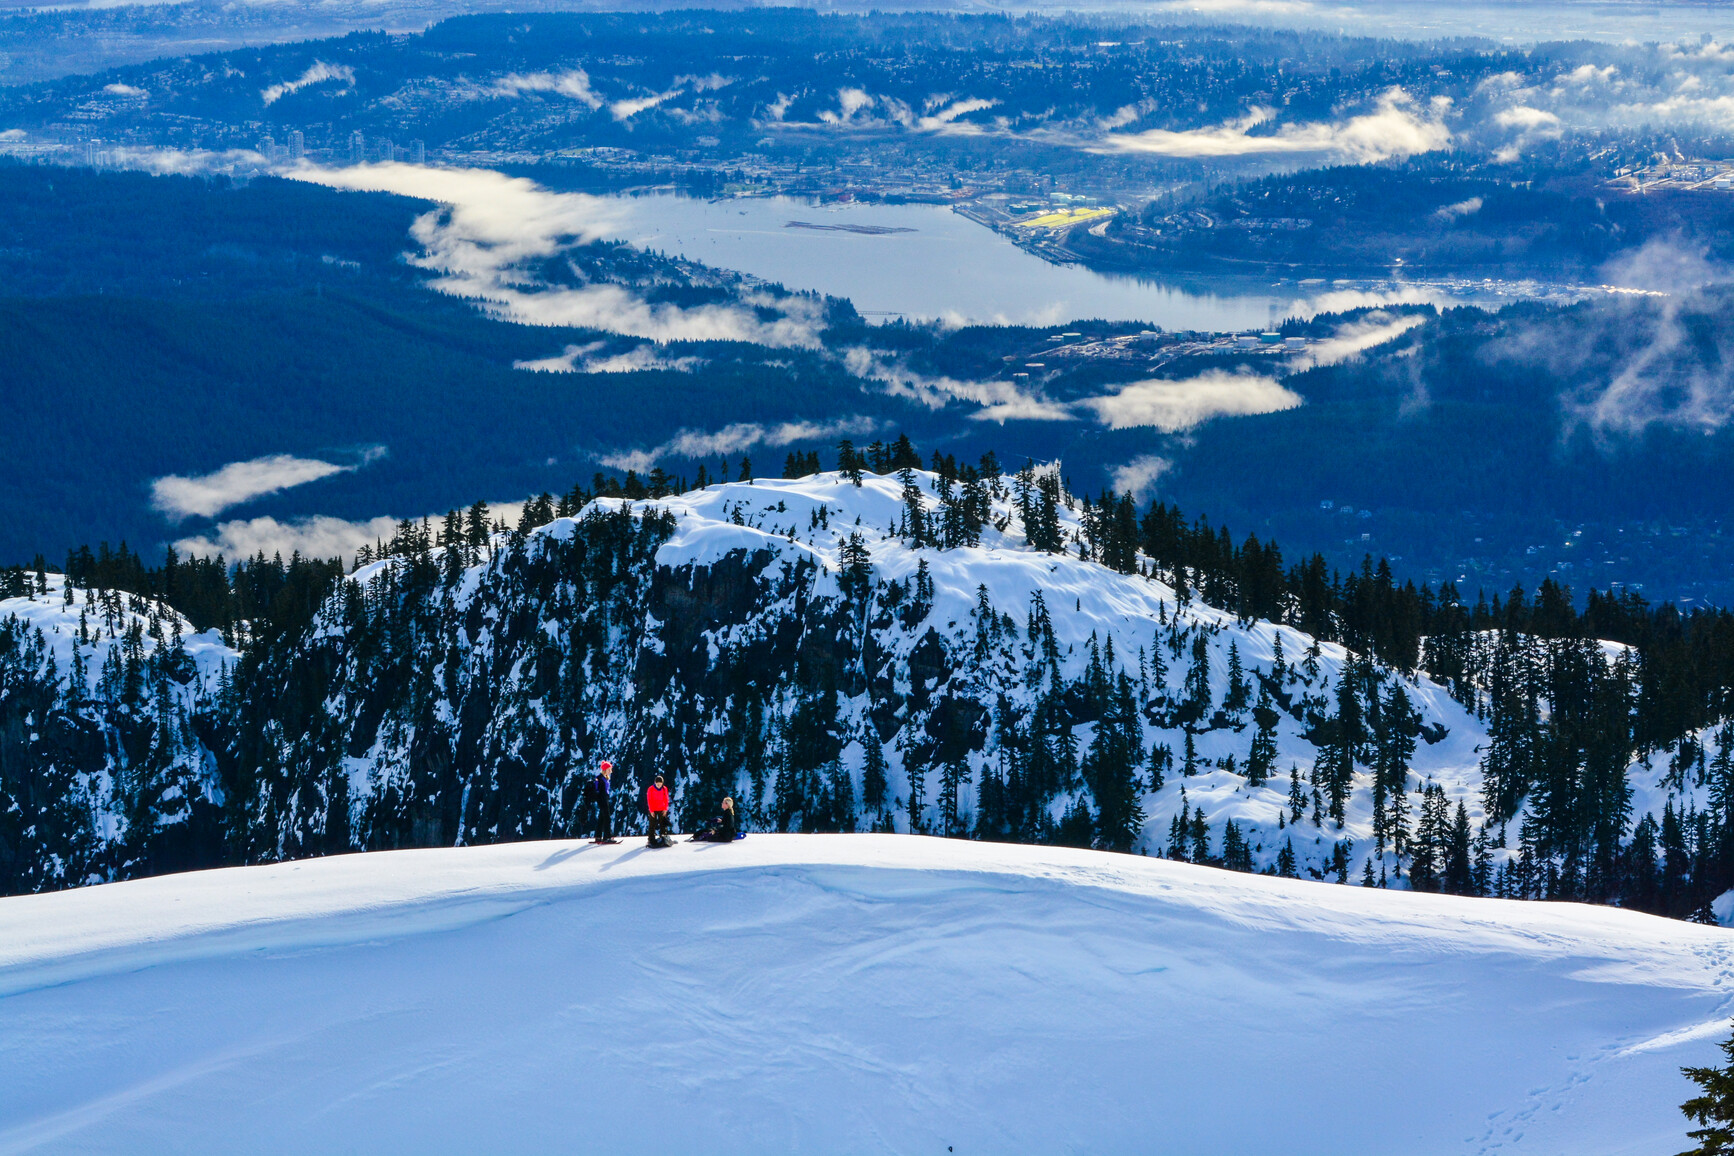 Group of snowshoers at top of snow covered mount over looking Vancouver in the background.